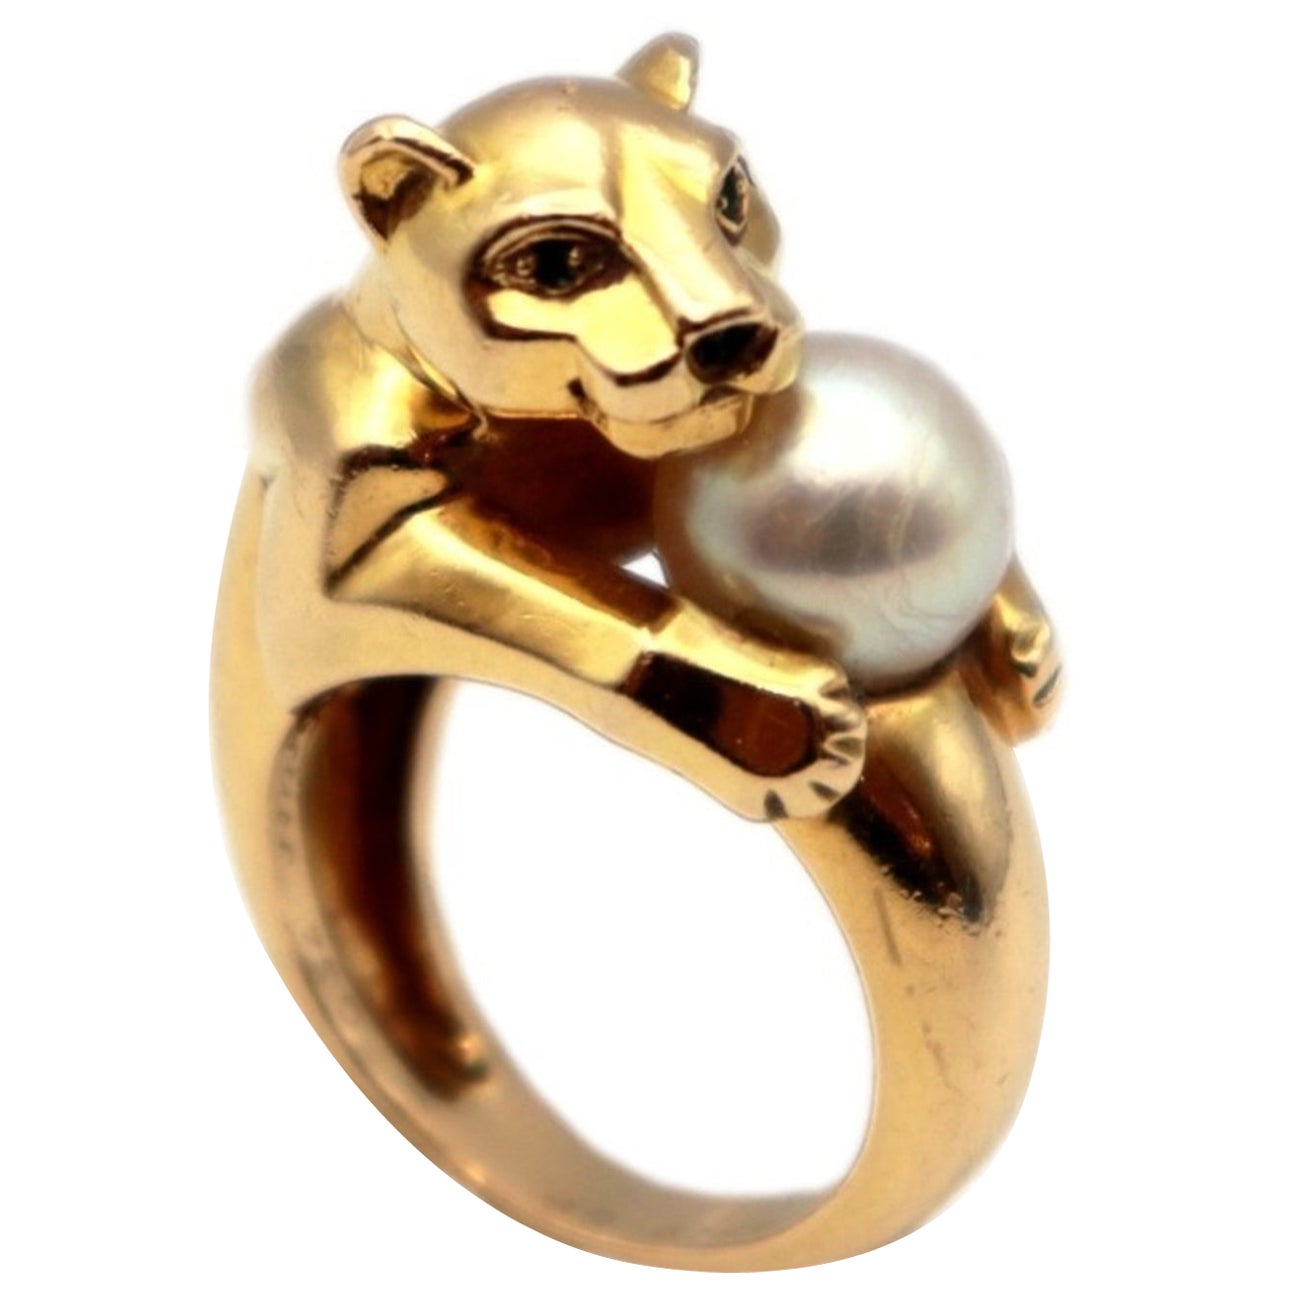 Cartier Vedra Panther Pearl, Emerald, Onyx Ring in 18K Yellow Gold For Sale